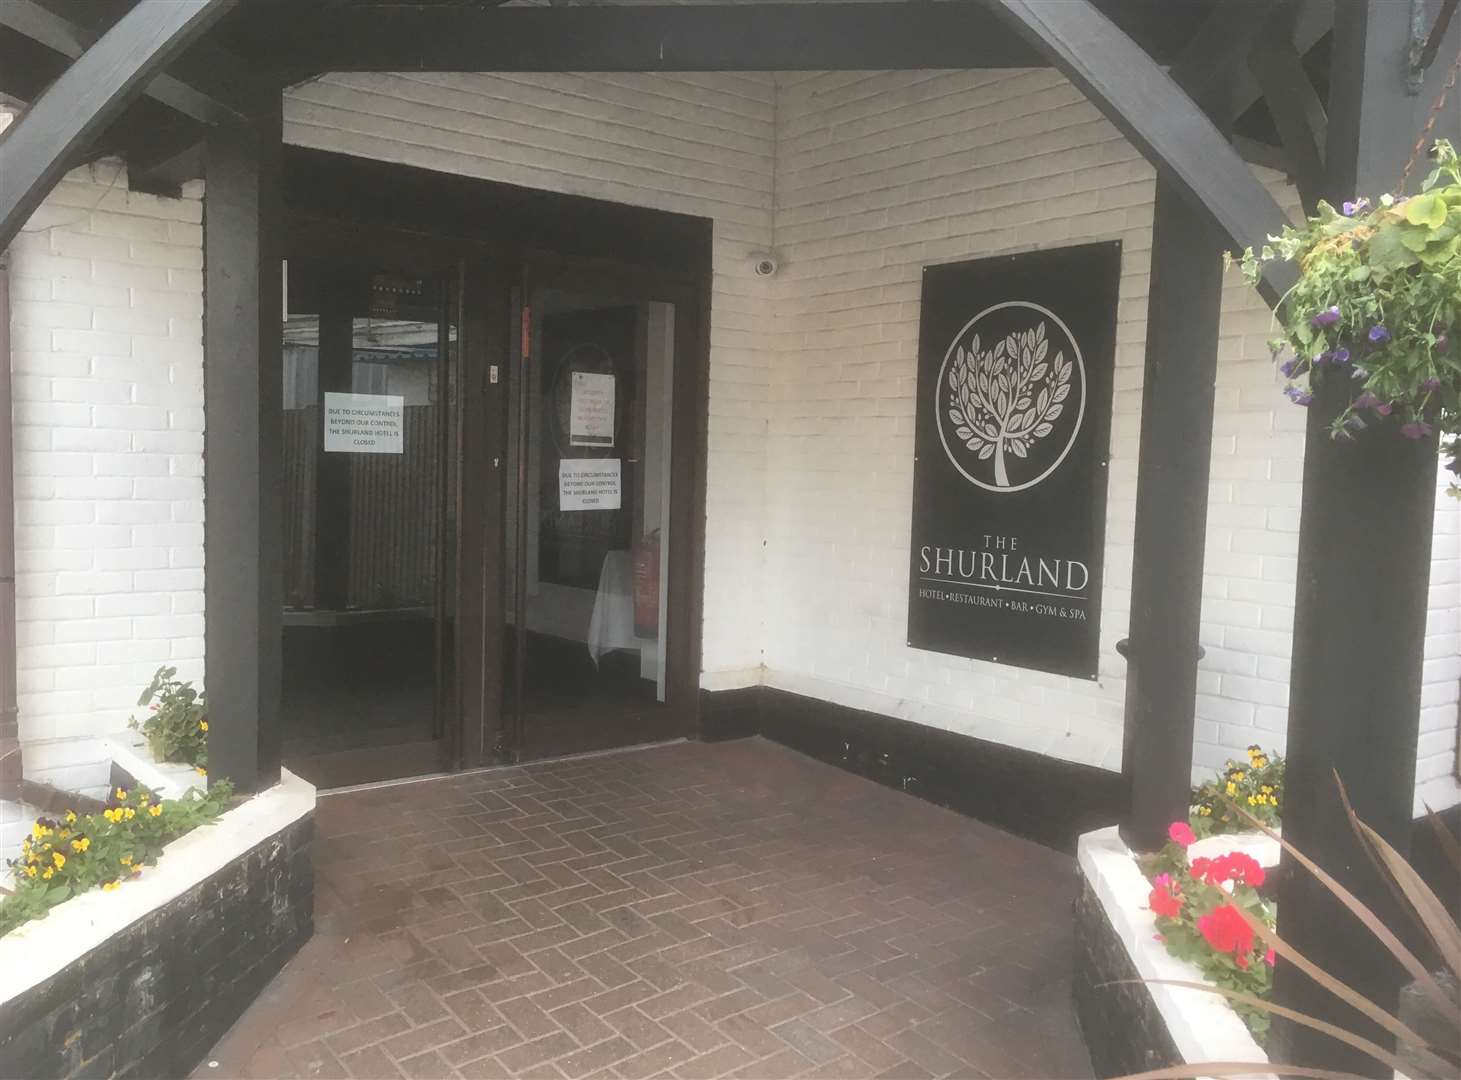 The Shurland, in Eastchurch High Street, has closed its doors